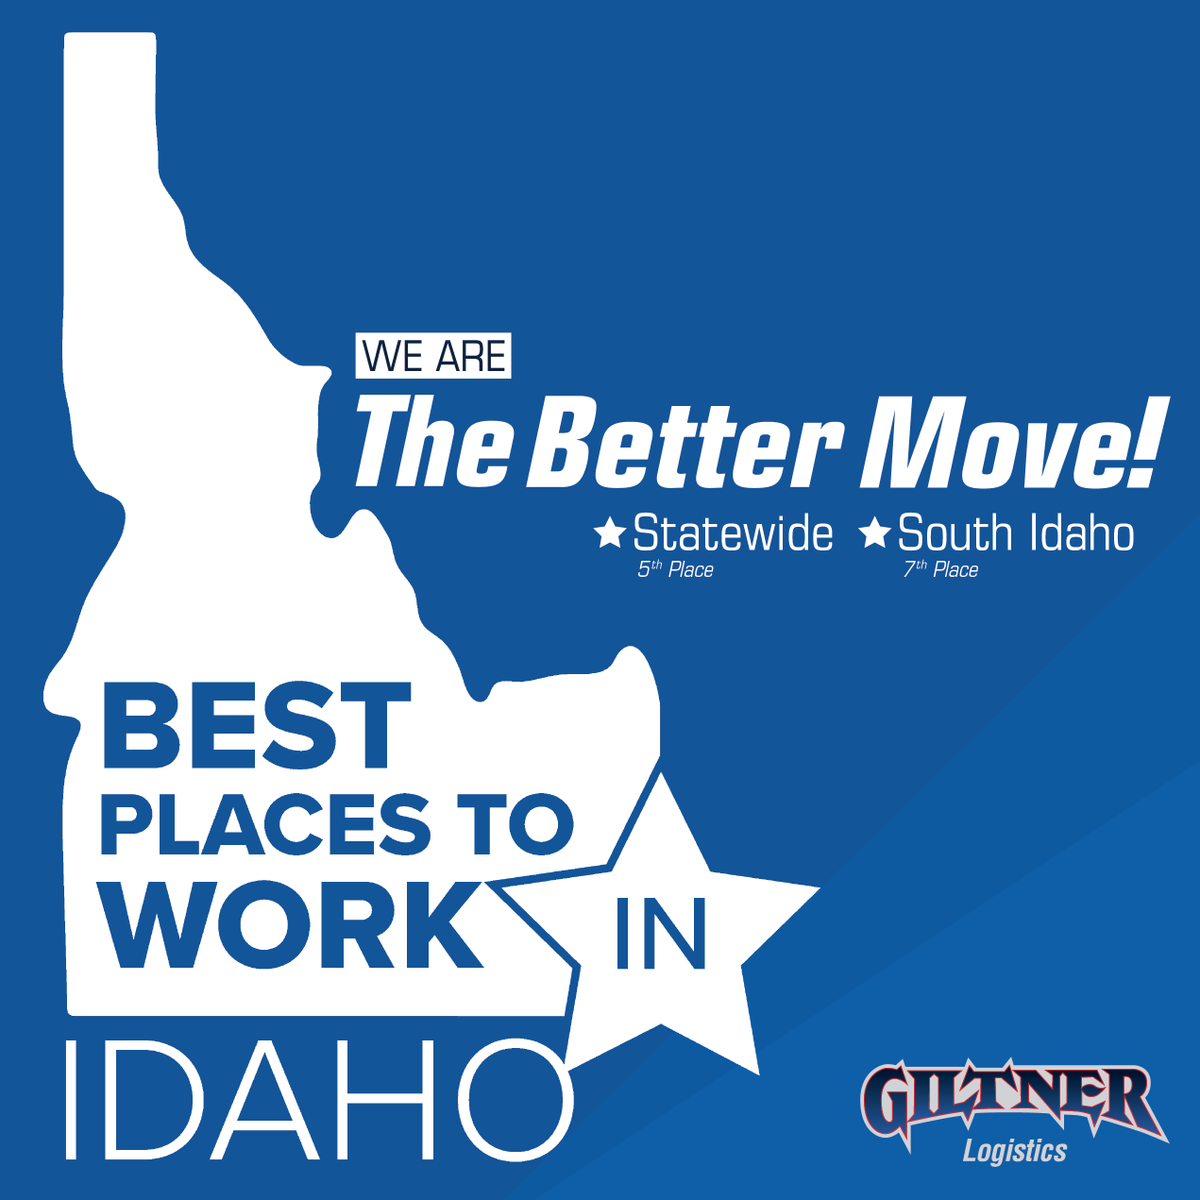 We are deeply honored to be named one of the top ten #BestPlacesToWork in Idaho by our incredible employees, thank you!! 🏆

🏅Statewide: 5th Place 🏅South Idaho: 7th Place

#JoinOurTeam #LoveWhereYouWork #WereHiring #GiltnerGoesFurther #KeepAmericaMoving #TheBetterMove #Giltner